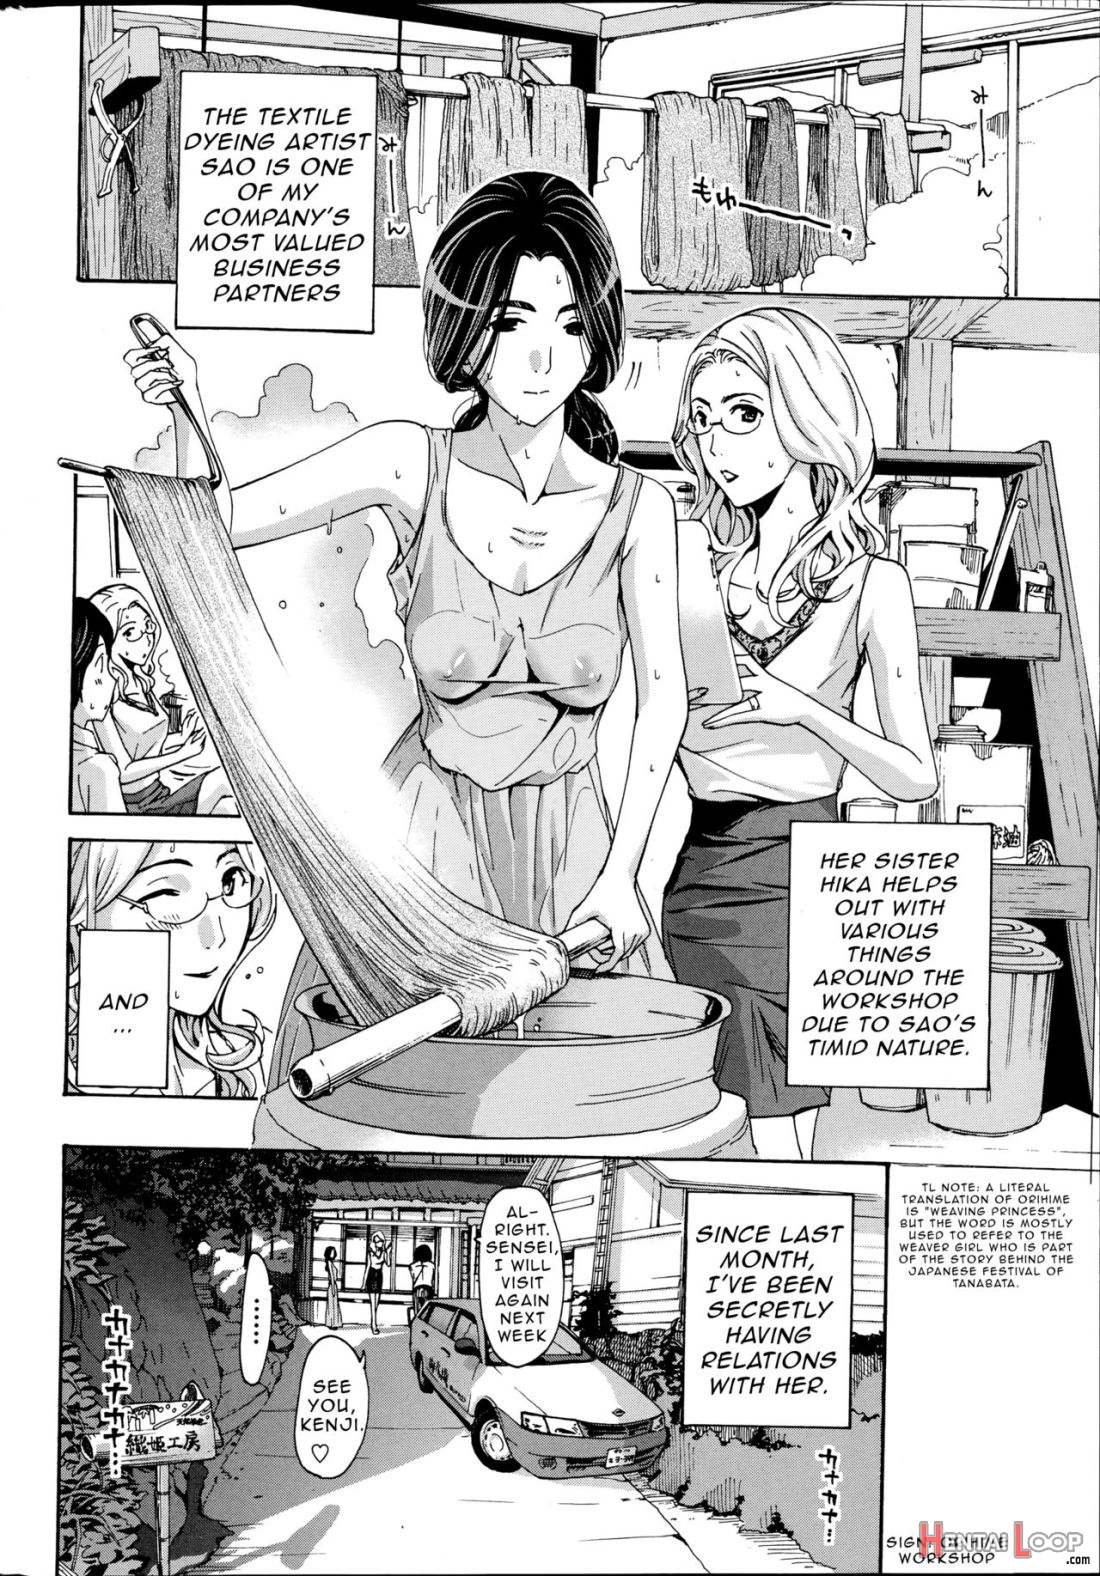 Orihime page 4